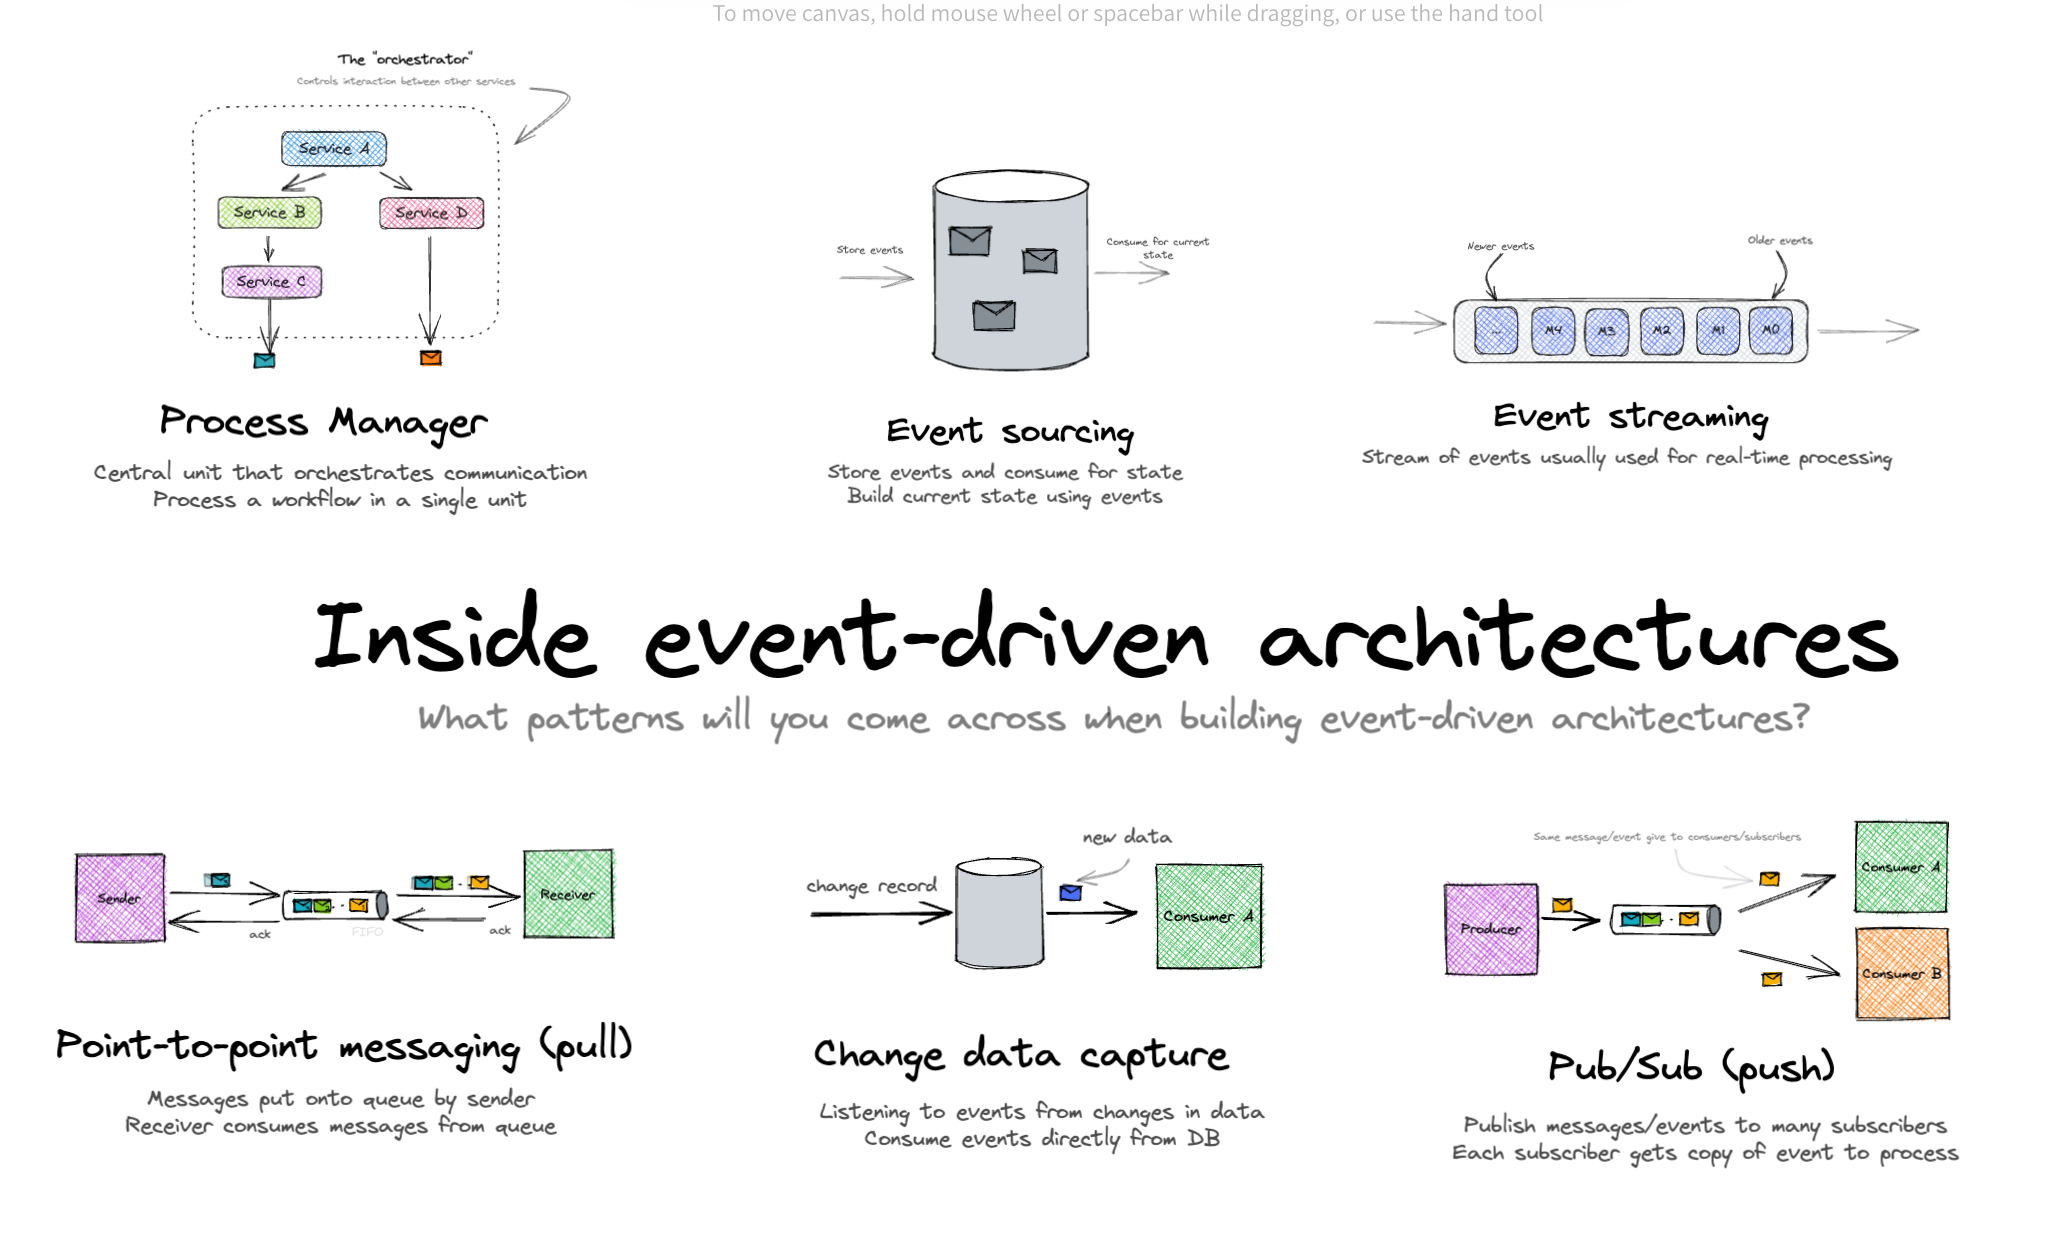 Inside event-driven architectures